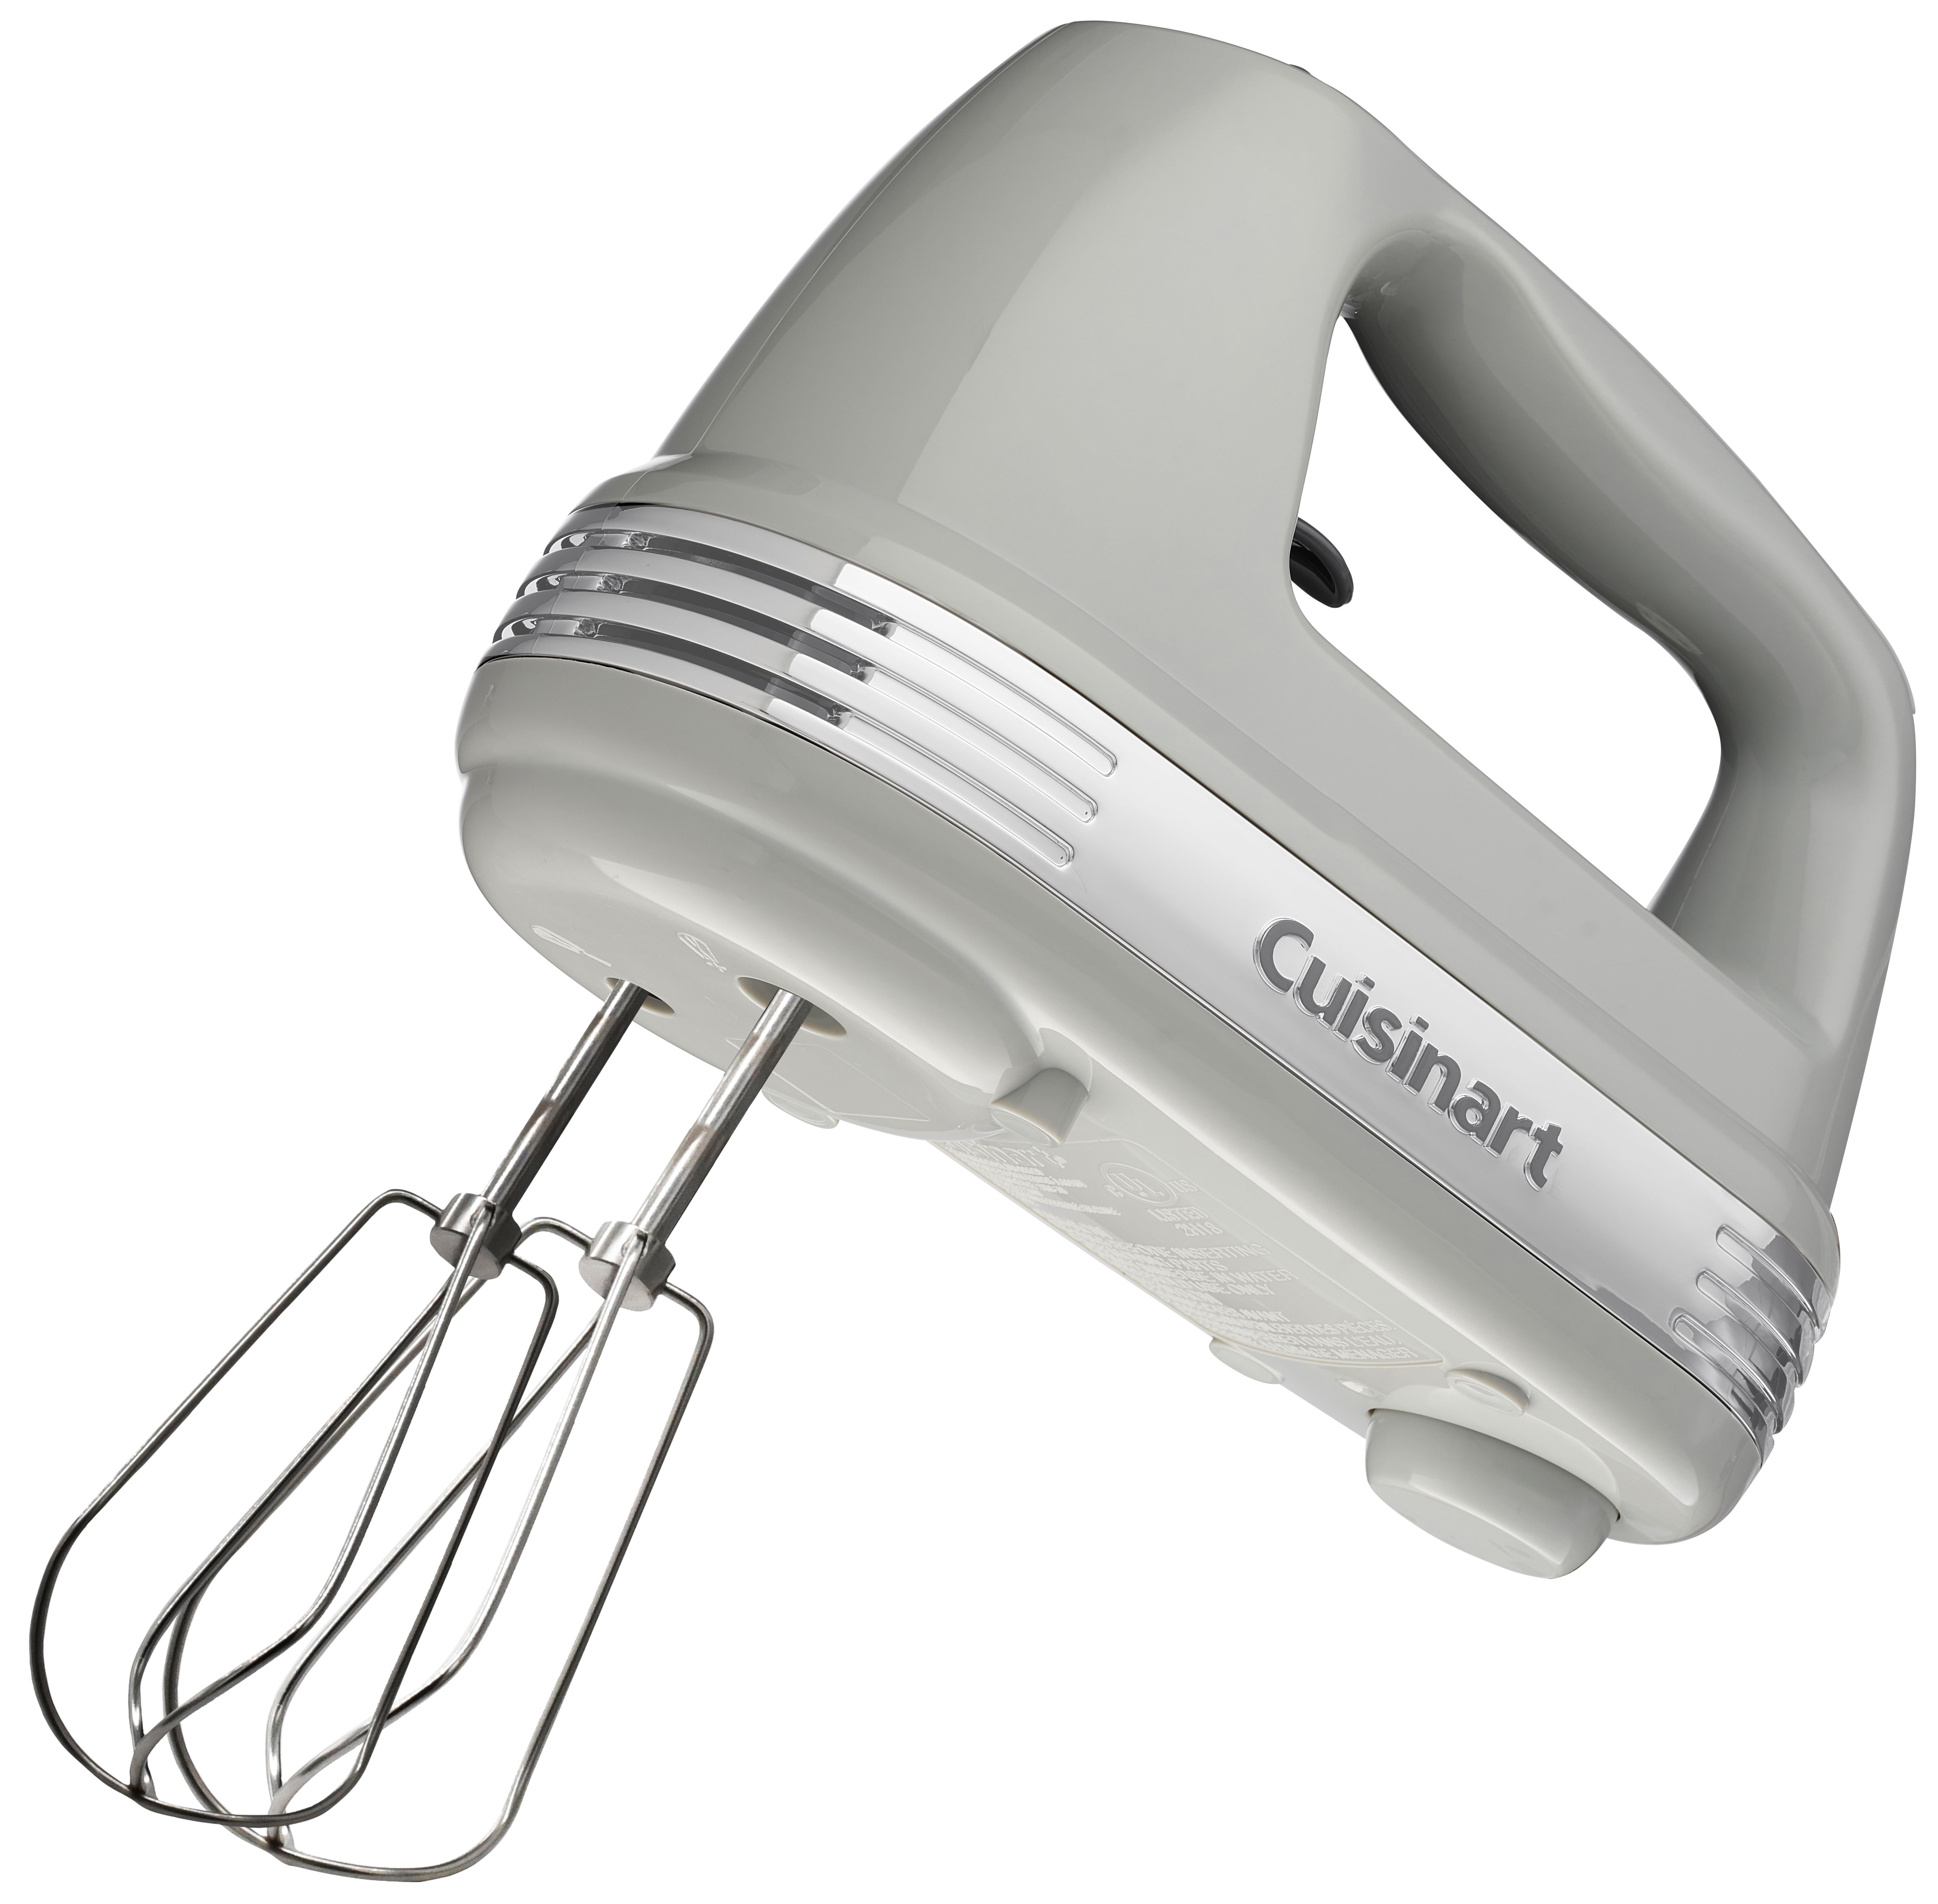  Cuisinart HM-90BCS Power Advantage Plus 9-Speed Handheld Mixer  with Storage Case, Brushed Chrome & CPT-180P1 Metal Classic 4-Slice  toaster, Brushed Stainless: Home & Kitchen